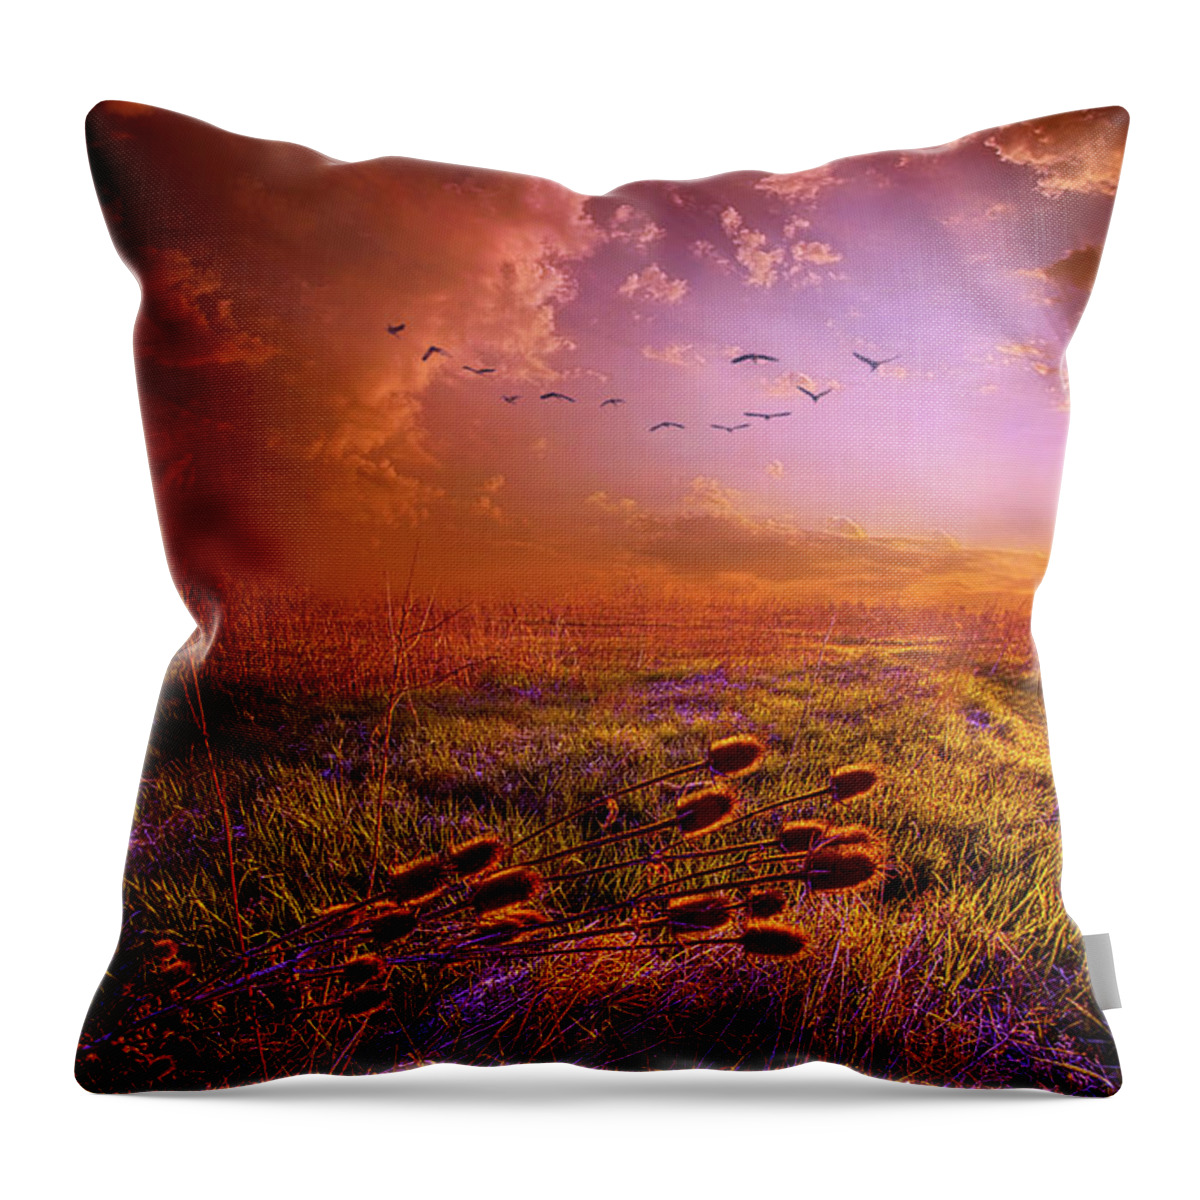 Landscape Throw Pillow featuring the photograph Guiding Light by Phil Koch